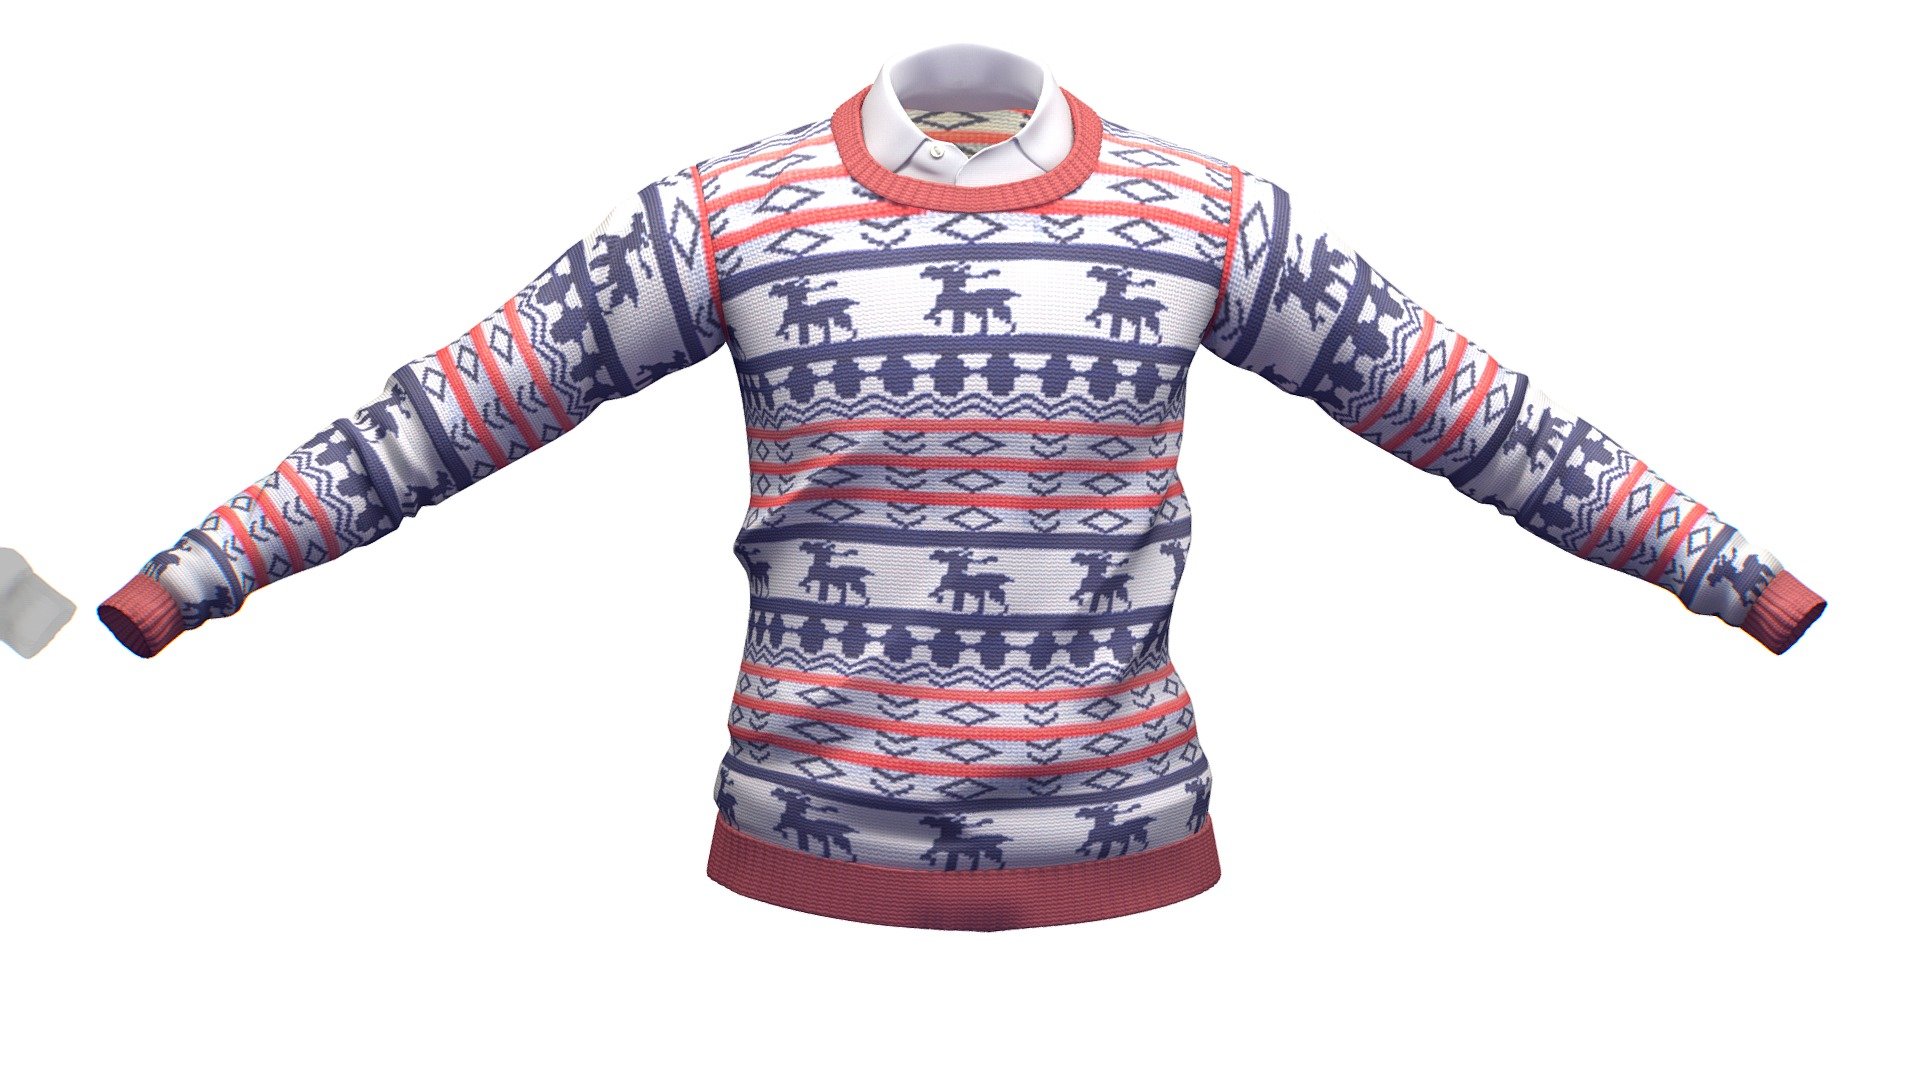 Cartoon High Poly Subdivision Knitted Sweater

No HDRI map, No Light, No material settings - only Diffuse/Color Map Texture (2500x2500) 

More information about the 3D model: please use the Sketchfab Model Inspector - Key (i) - Cartoon High Poly Subdivision Knitted Sweater - Buy Royalty Free 3D model by Oleg Shuldiakov (@olegshuldiakov) 3d model